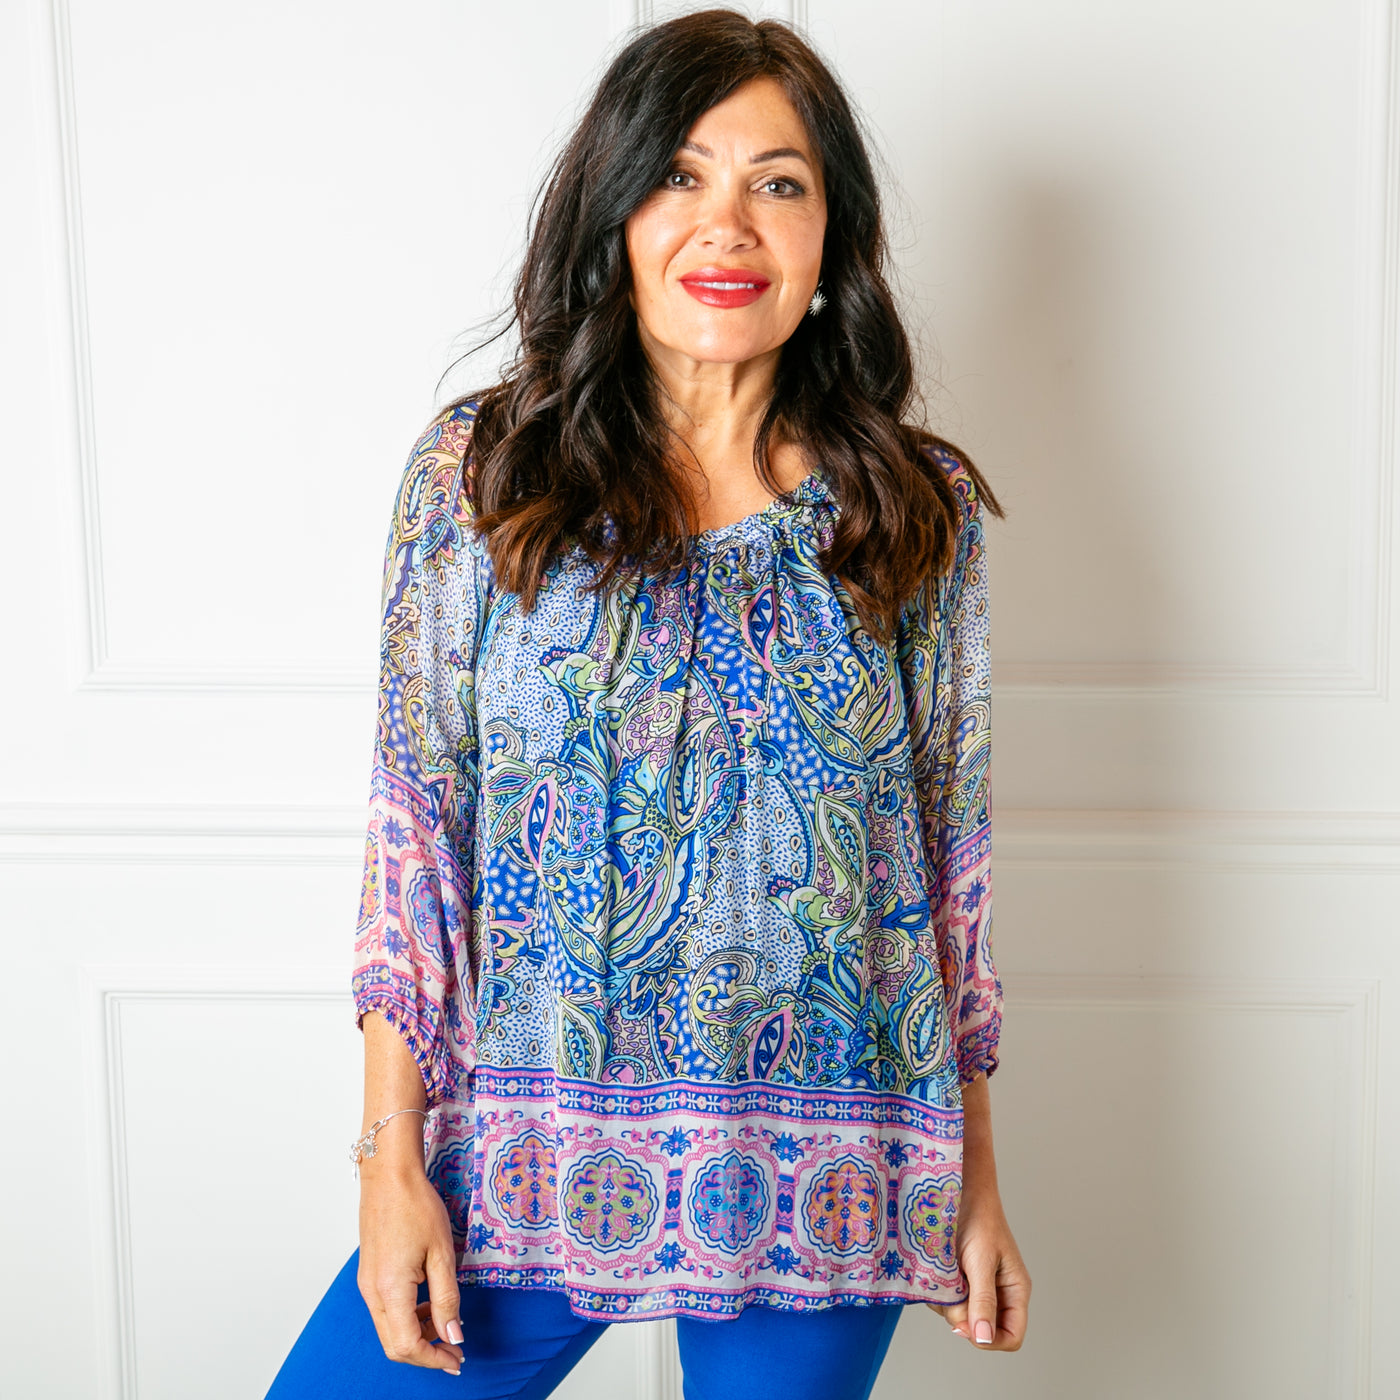 The royal blue Silk Blend Paisley Top with 3/4 length sleeves with elastic around the cuffs